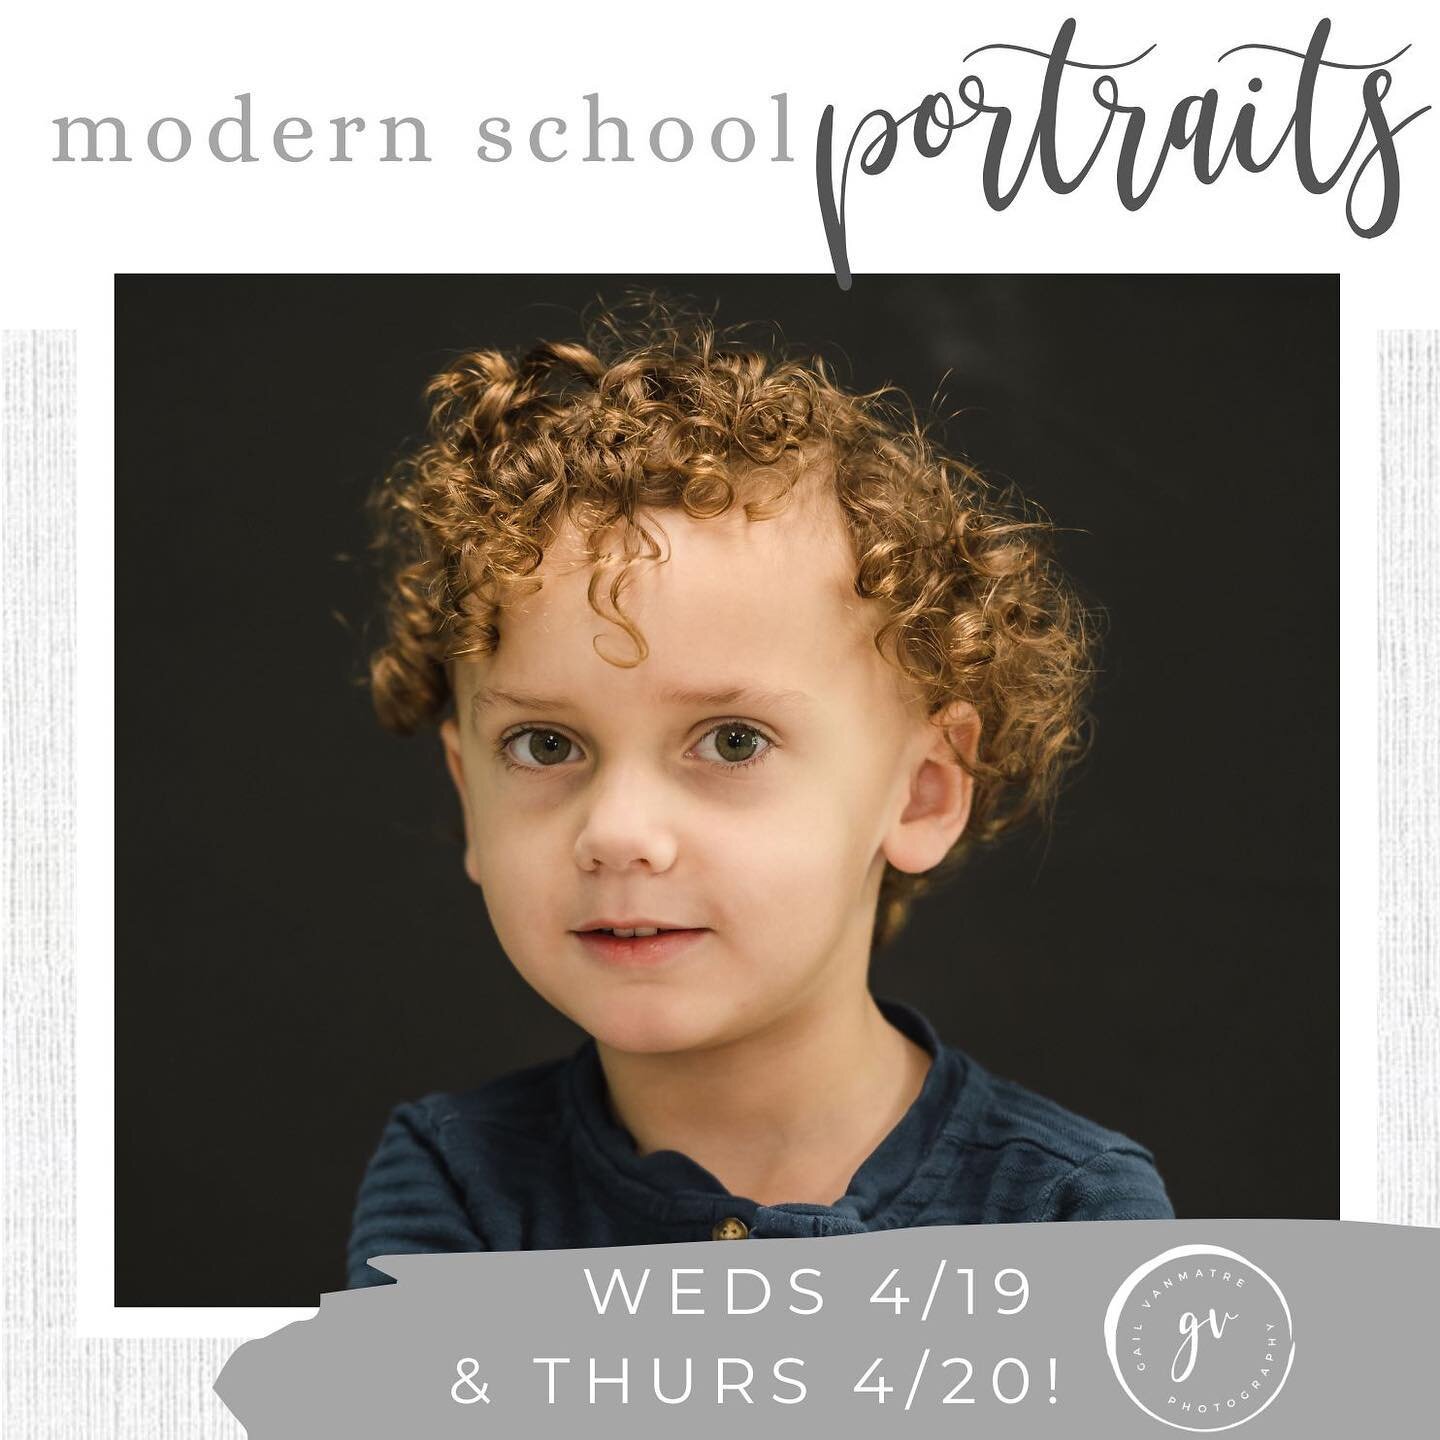 Today and tomorrow I&rsquo;m photographing some of my very favorite kiddos at the most amazing  preschool. Bring on the cuteness! We&rsquo;ve done school portraits ranging in style from playing with bubbles, fall leaves, spring flowers, and playing o